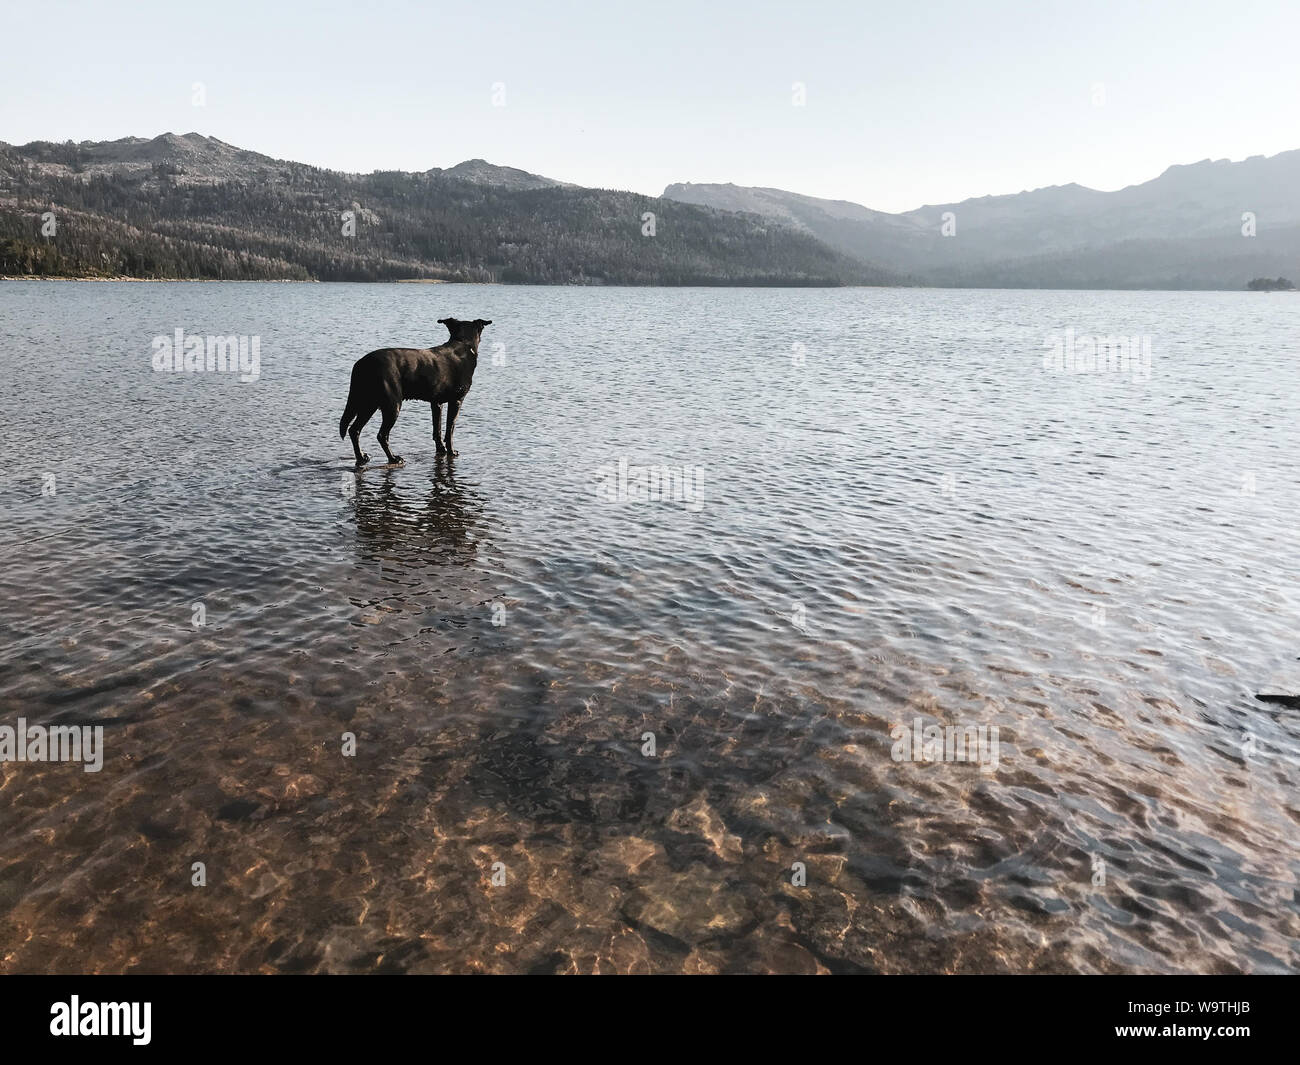 Dog standing in a lake, Wyoming, United States Stock Photo